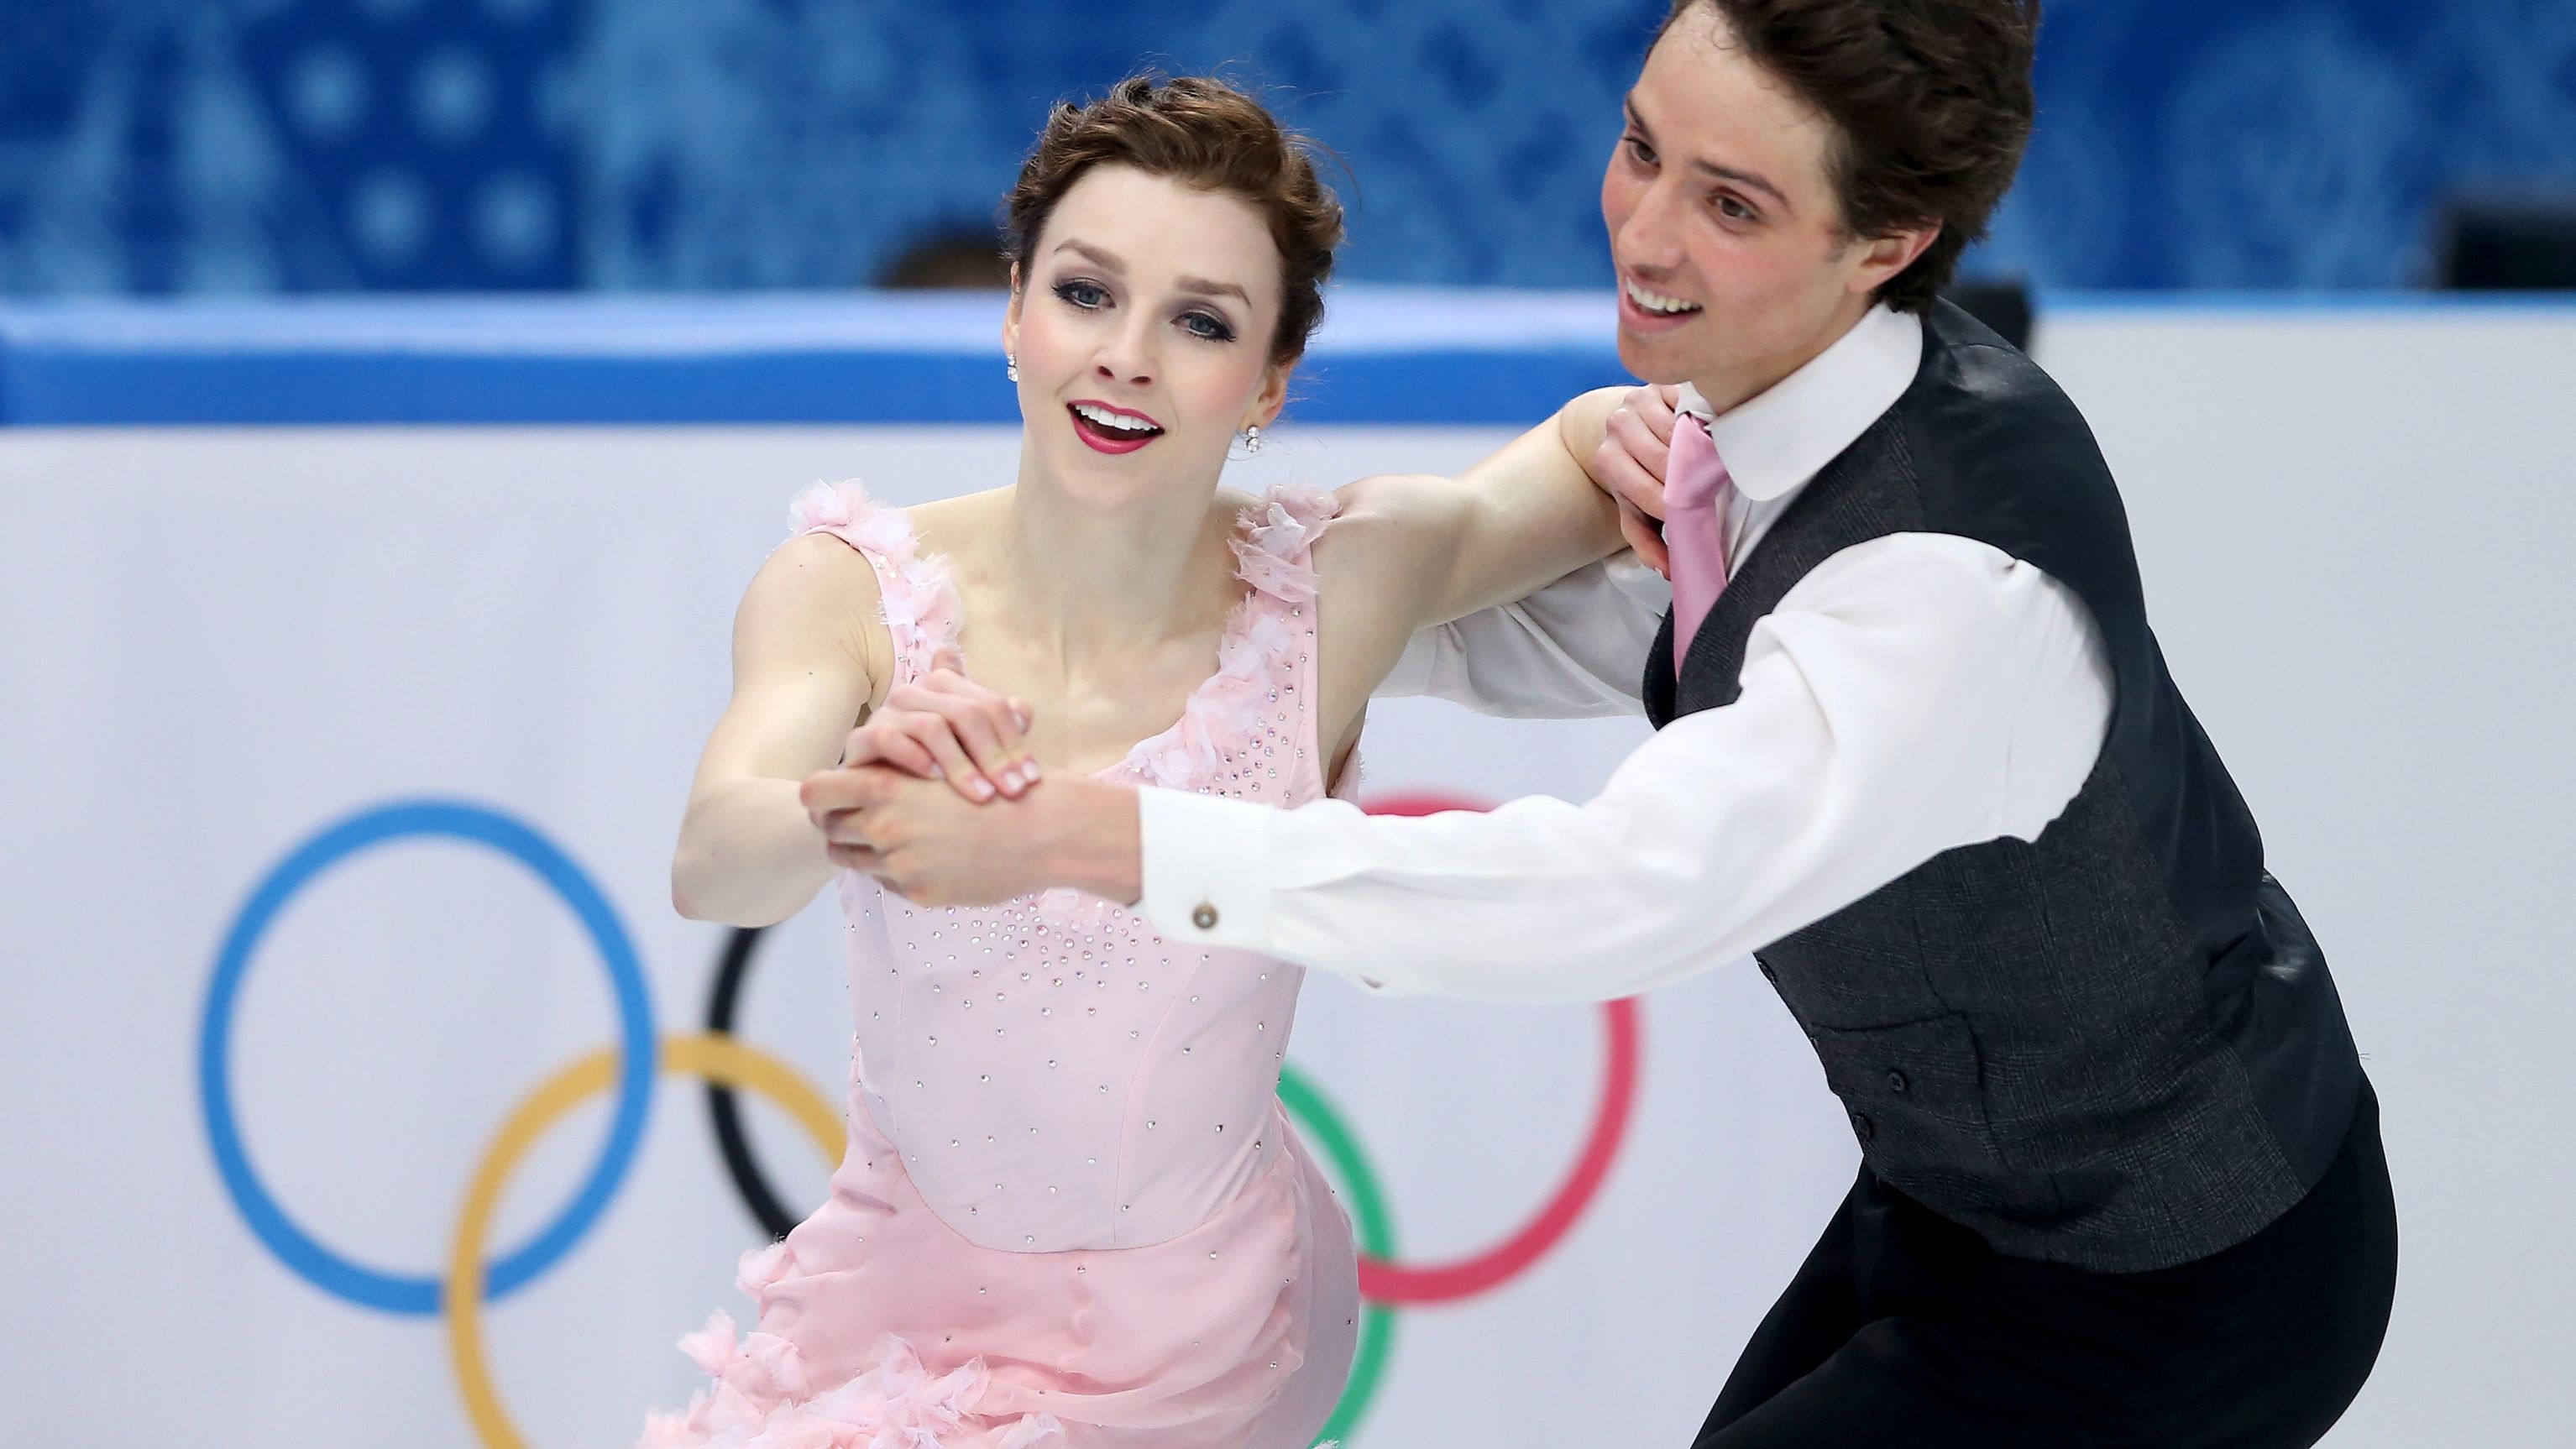 Alexandra Paul and Mitchell Islam of Canada compete at the Sochi 2014 Winter Olympics.